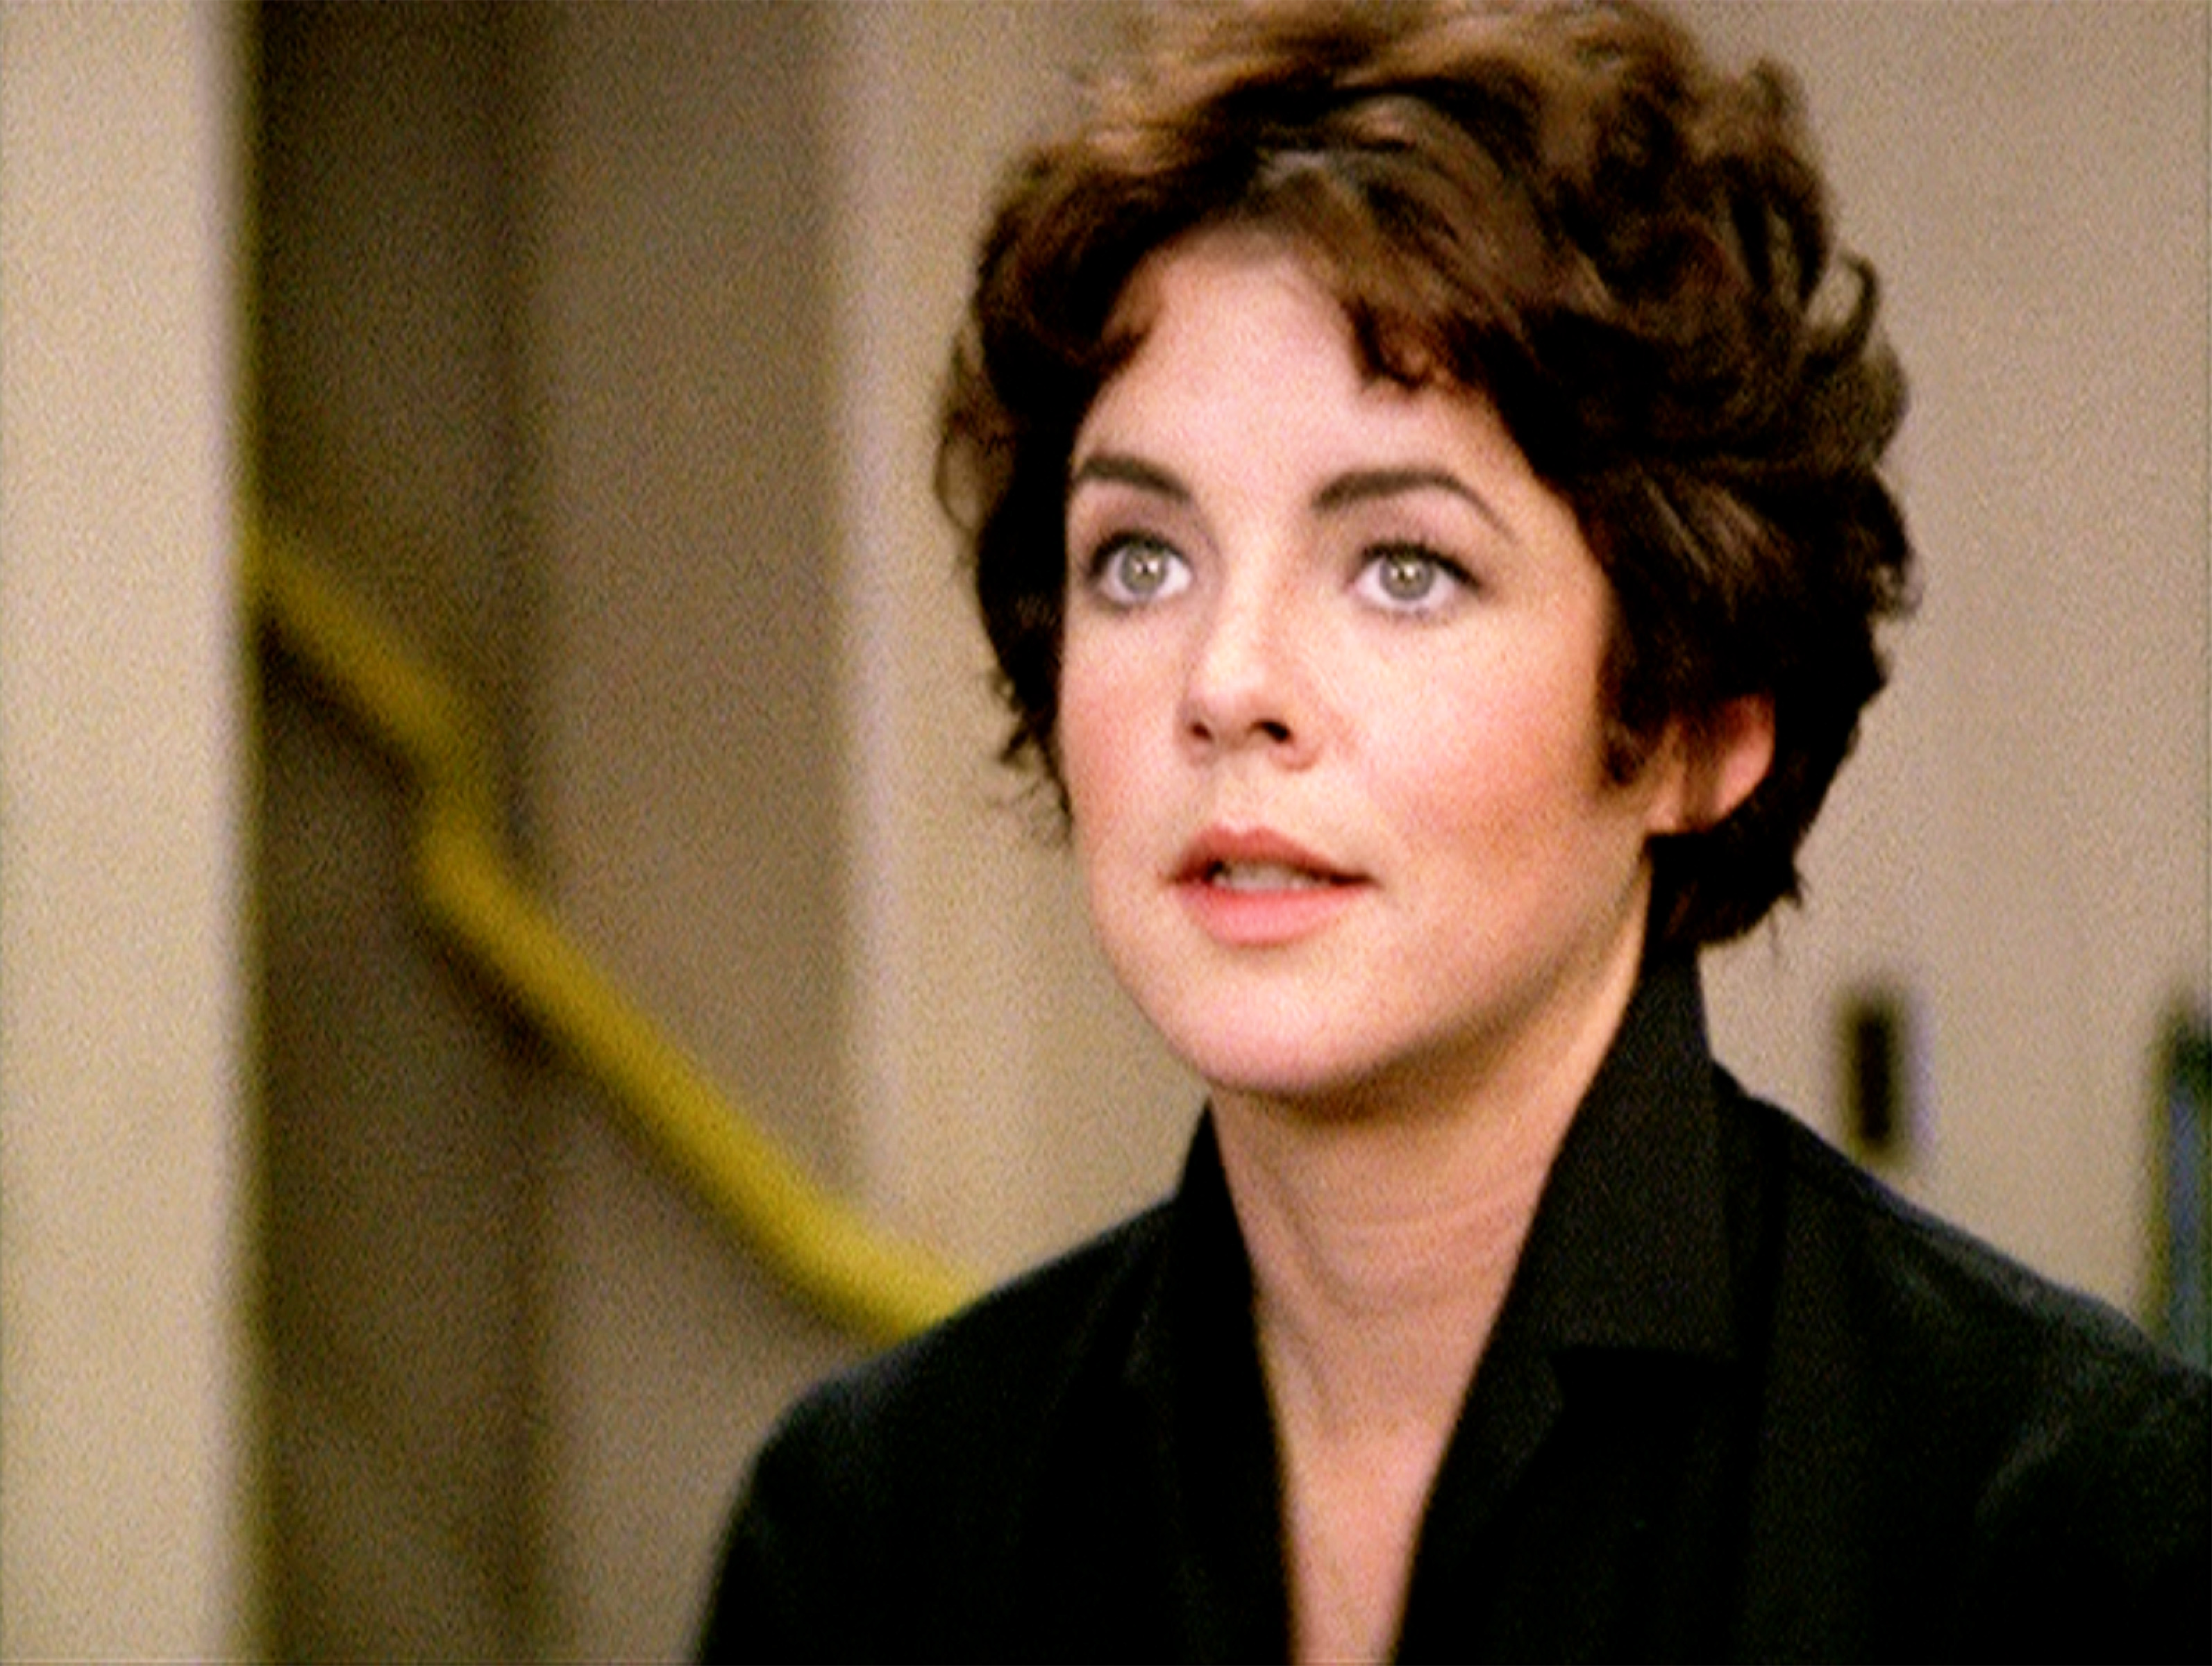 Stockard Channing as Betty Rizzo in "Grease," released on June 16, 1978. | Source: Getty Images